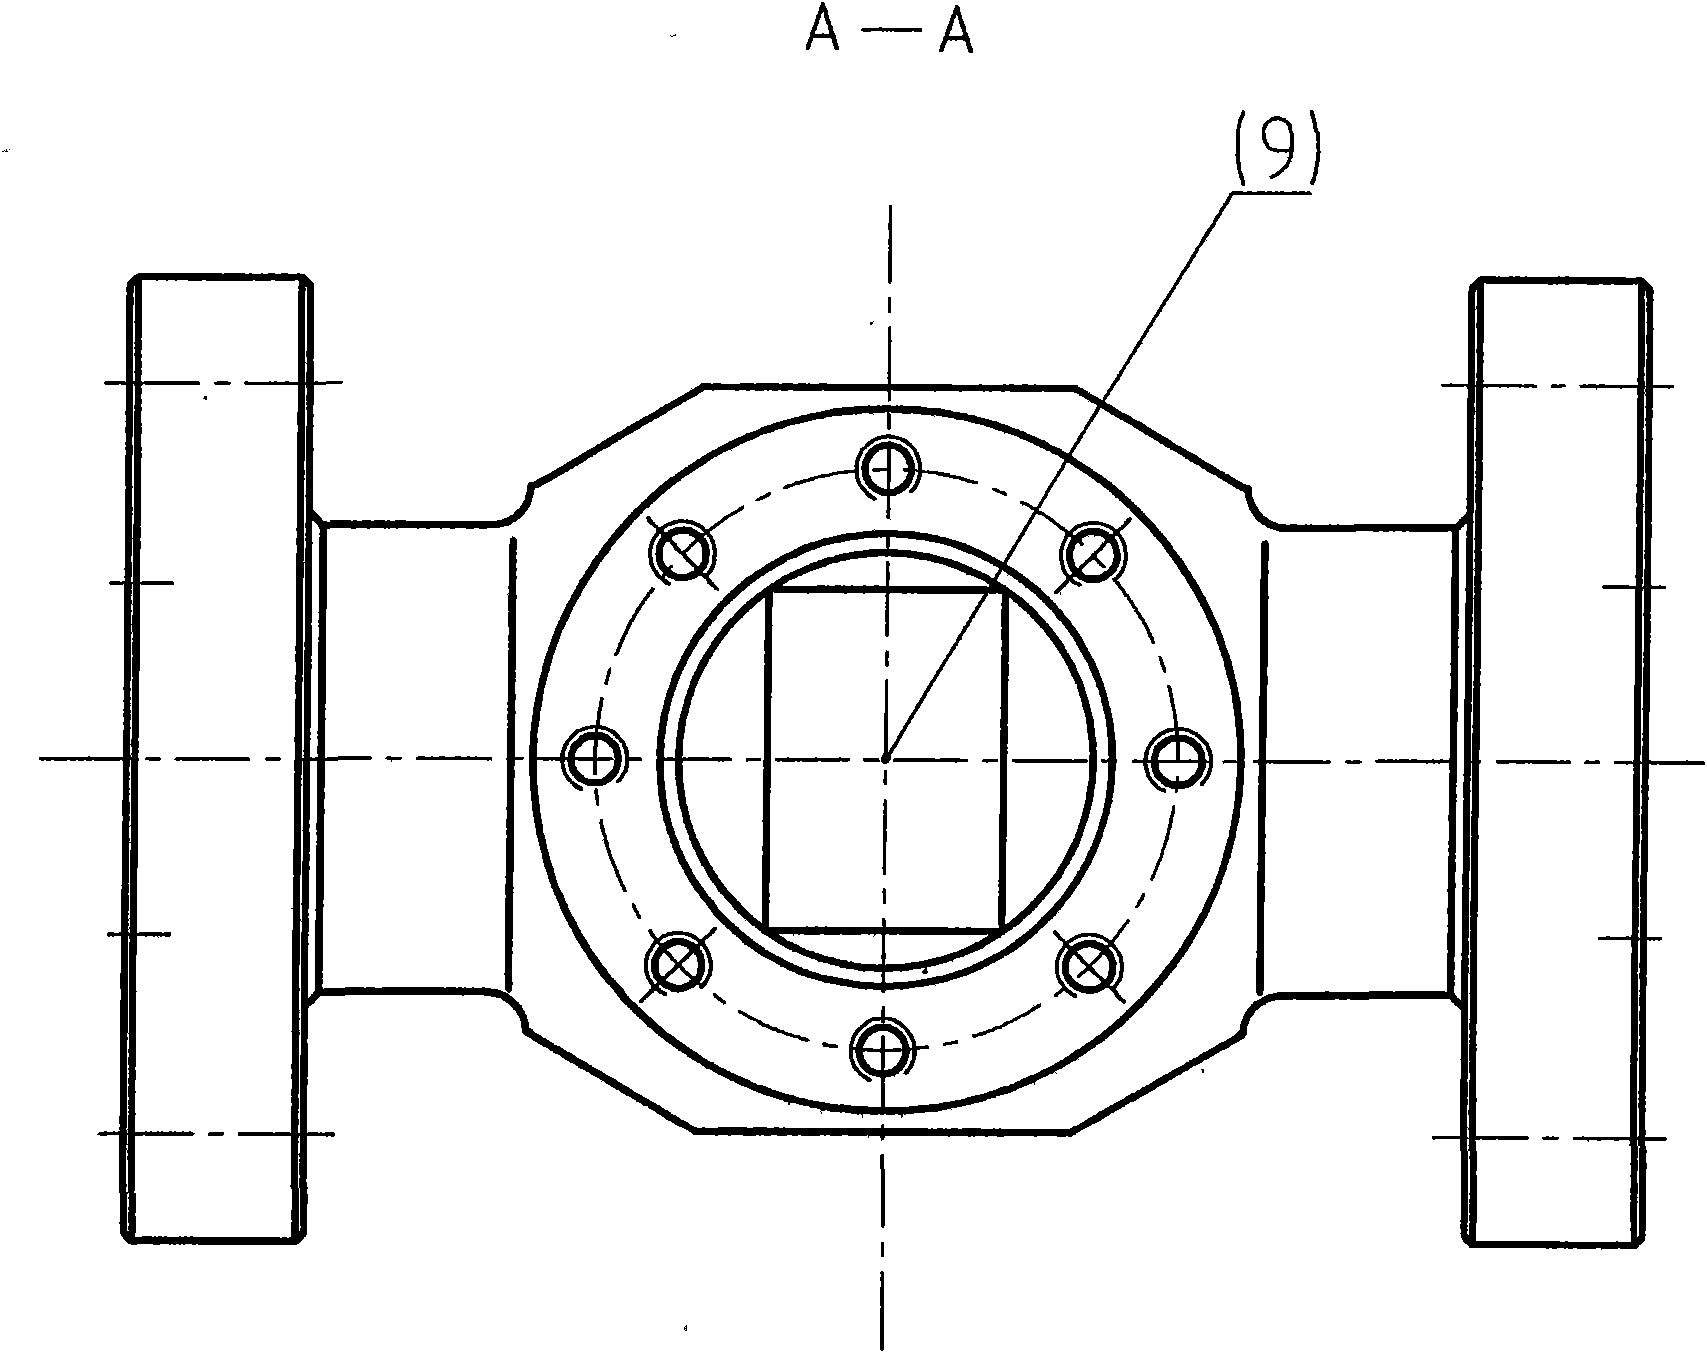 Two-section nonrising stem flat valve with switch indicator